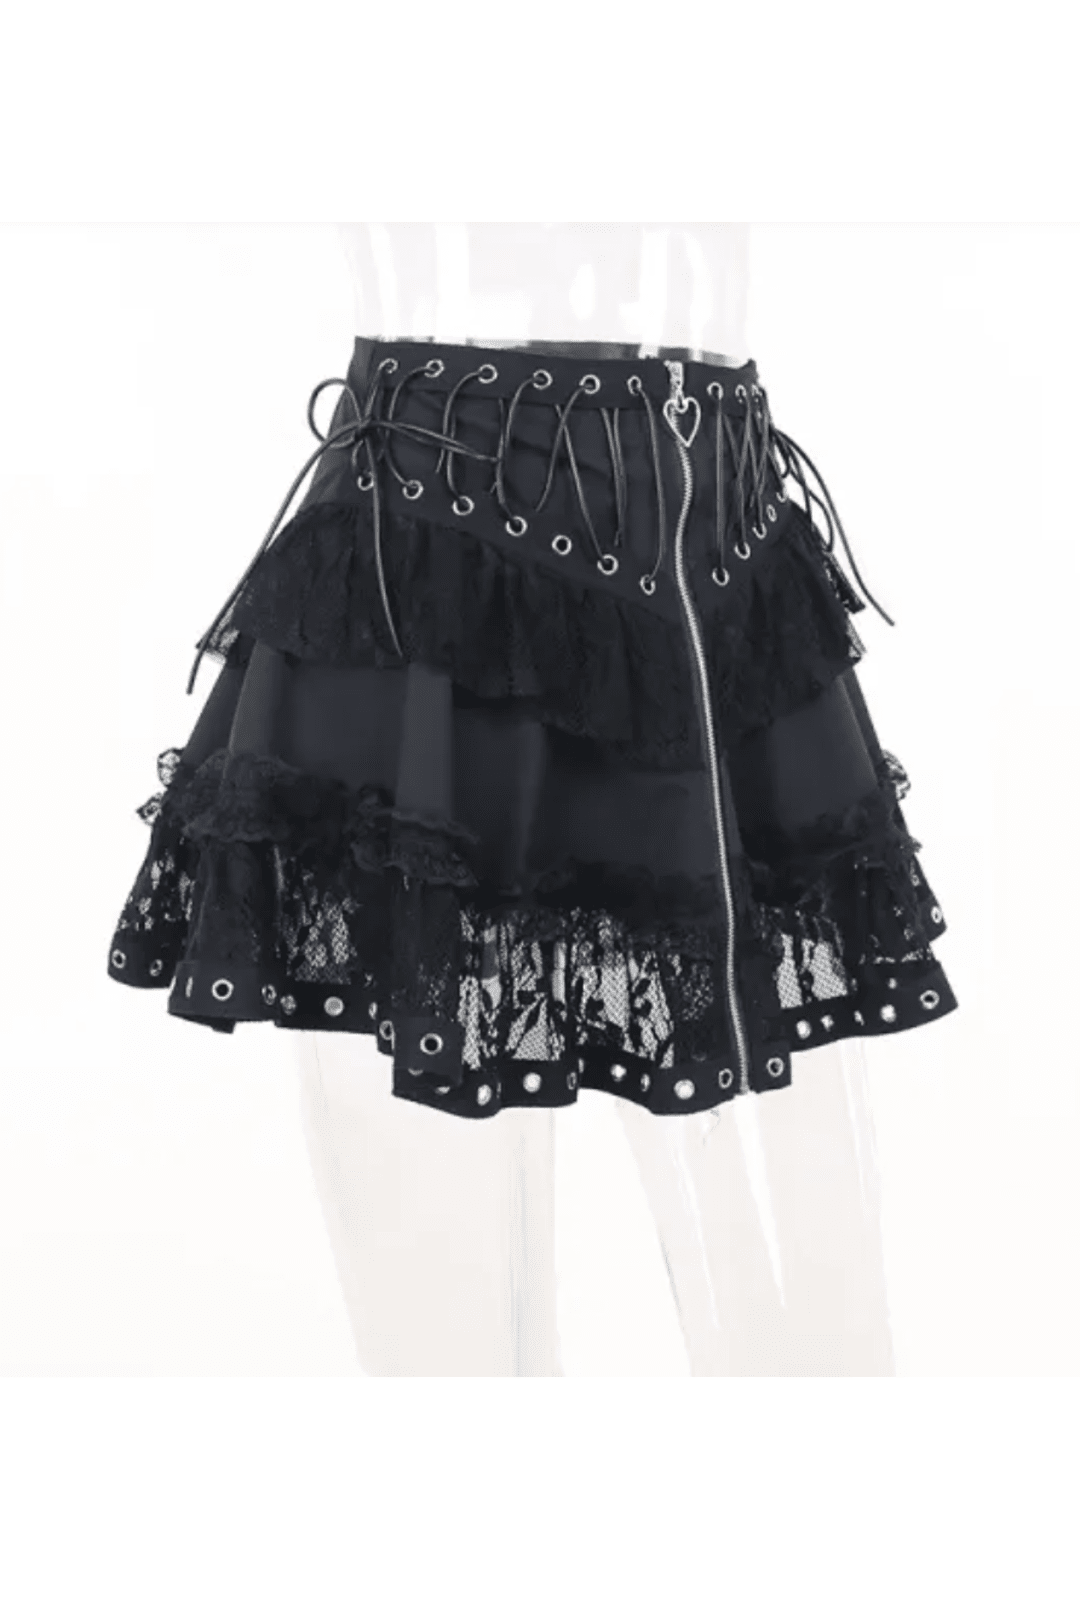 Black Eyelet Skirt with Lace Trim